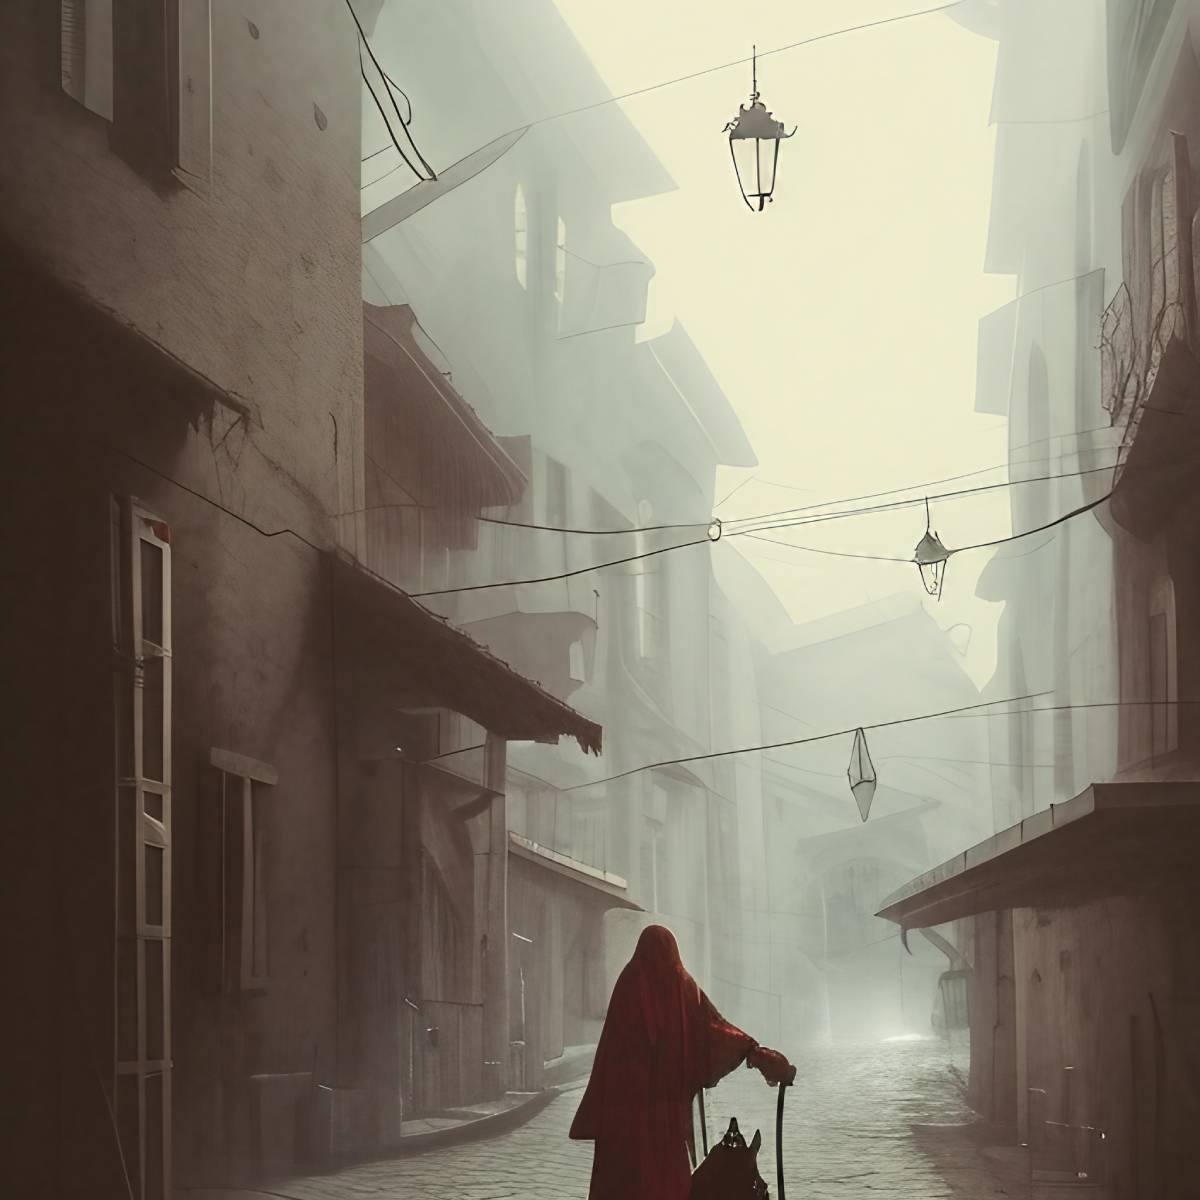 La Befana creeping through an Italian village at night. La Befana visits children on the night before Epiphany, rather than on Christmas Eve. She’s also, well, a witch. (© Odd Feed)